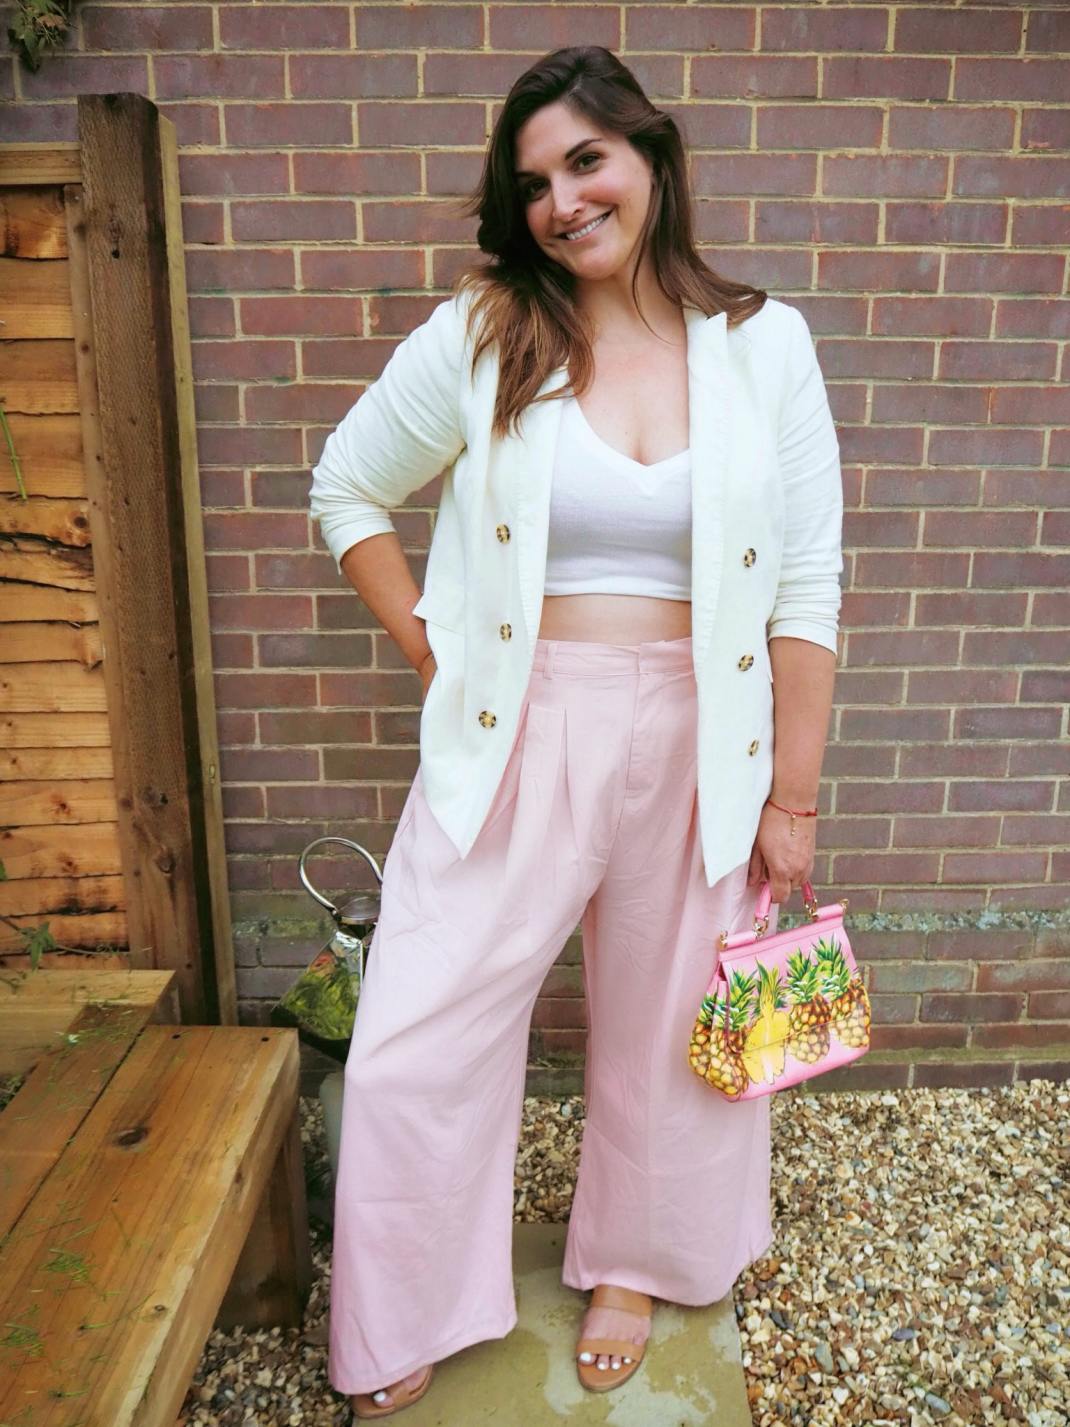 Perfectly pastel pink wide leg trousers - Emily Jane Johnston